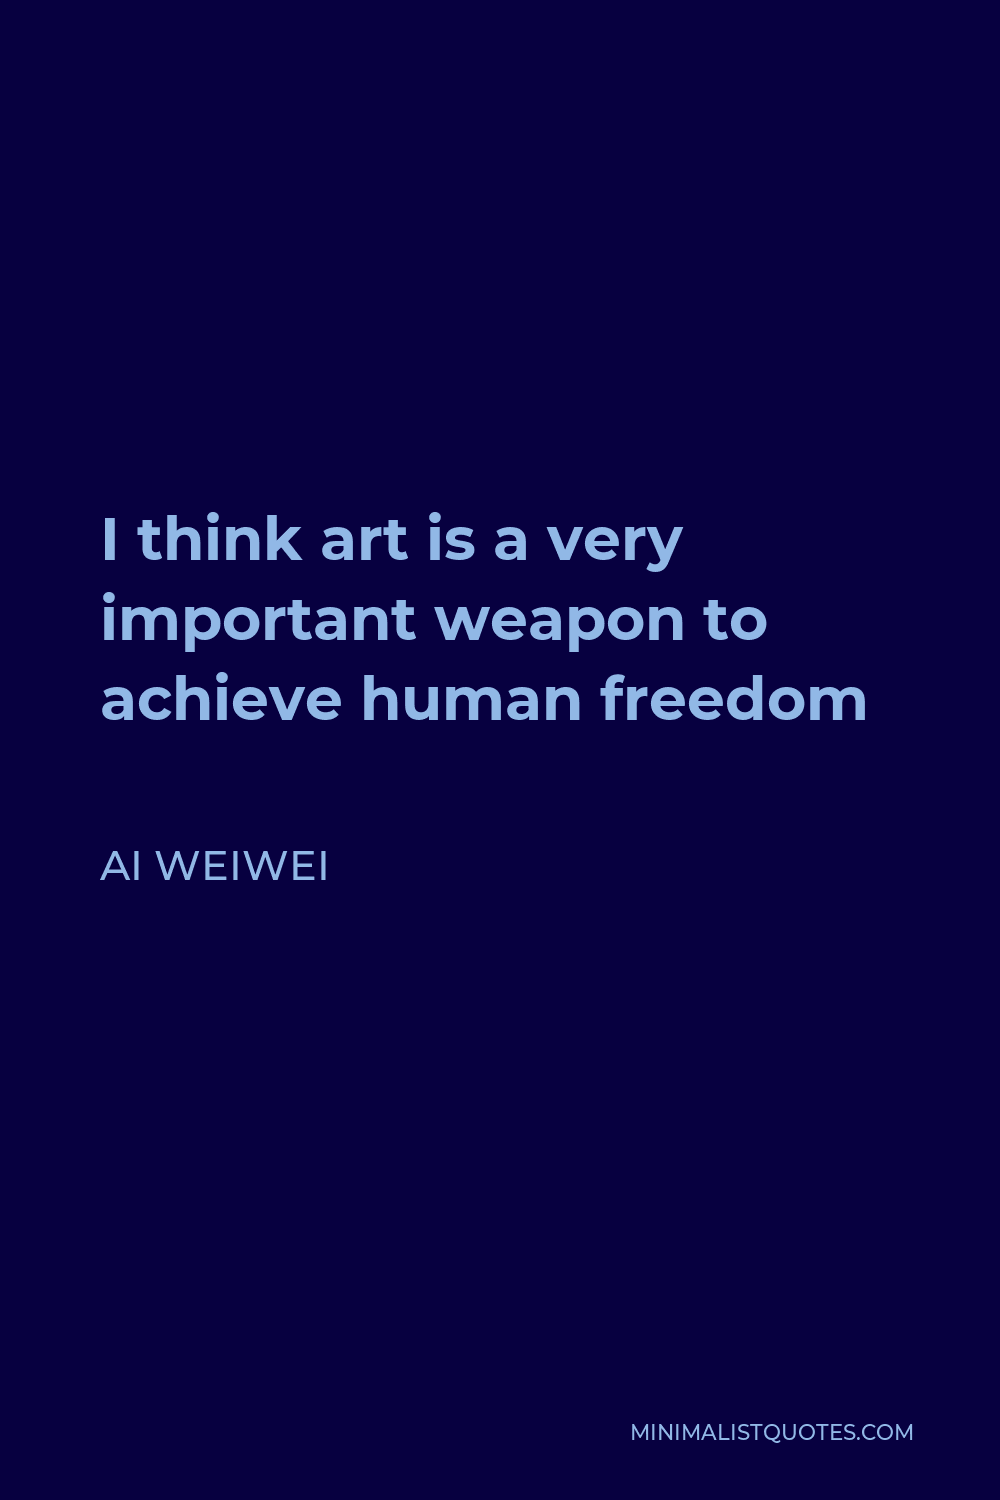 Ai Weiwei Quote - I think art is a very important weapon to achieve human freedom